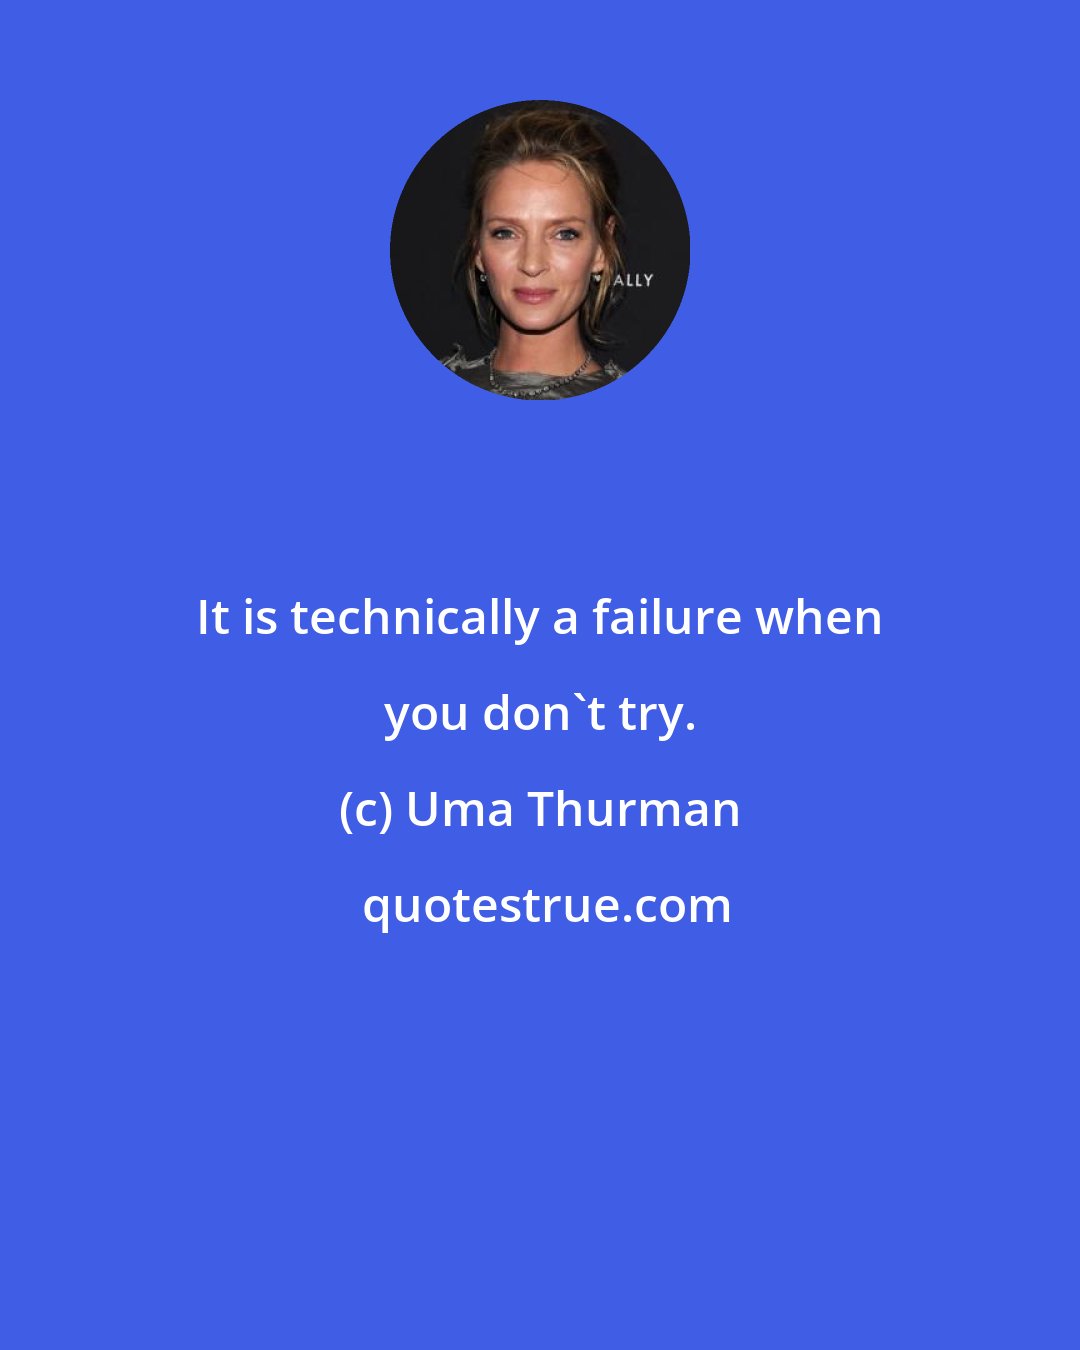 Uma Thurman: It is technically a failure when you don't try.